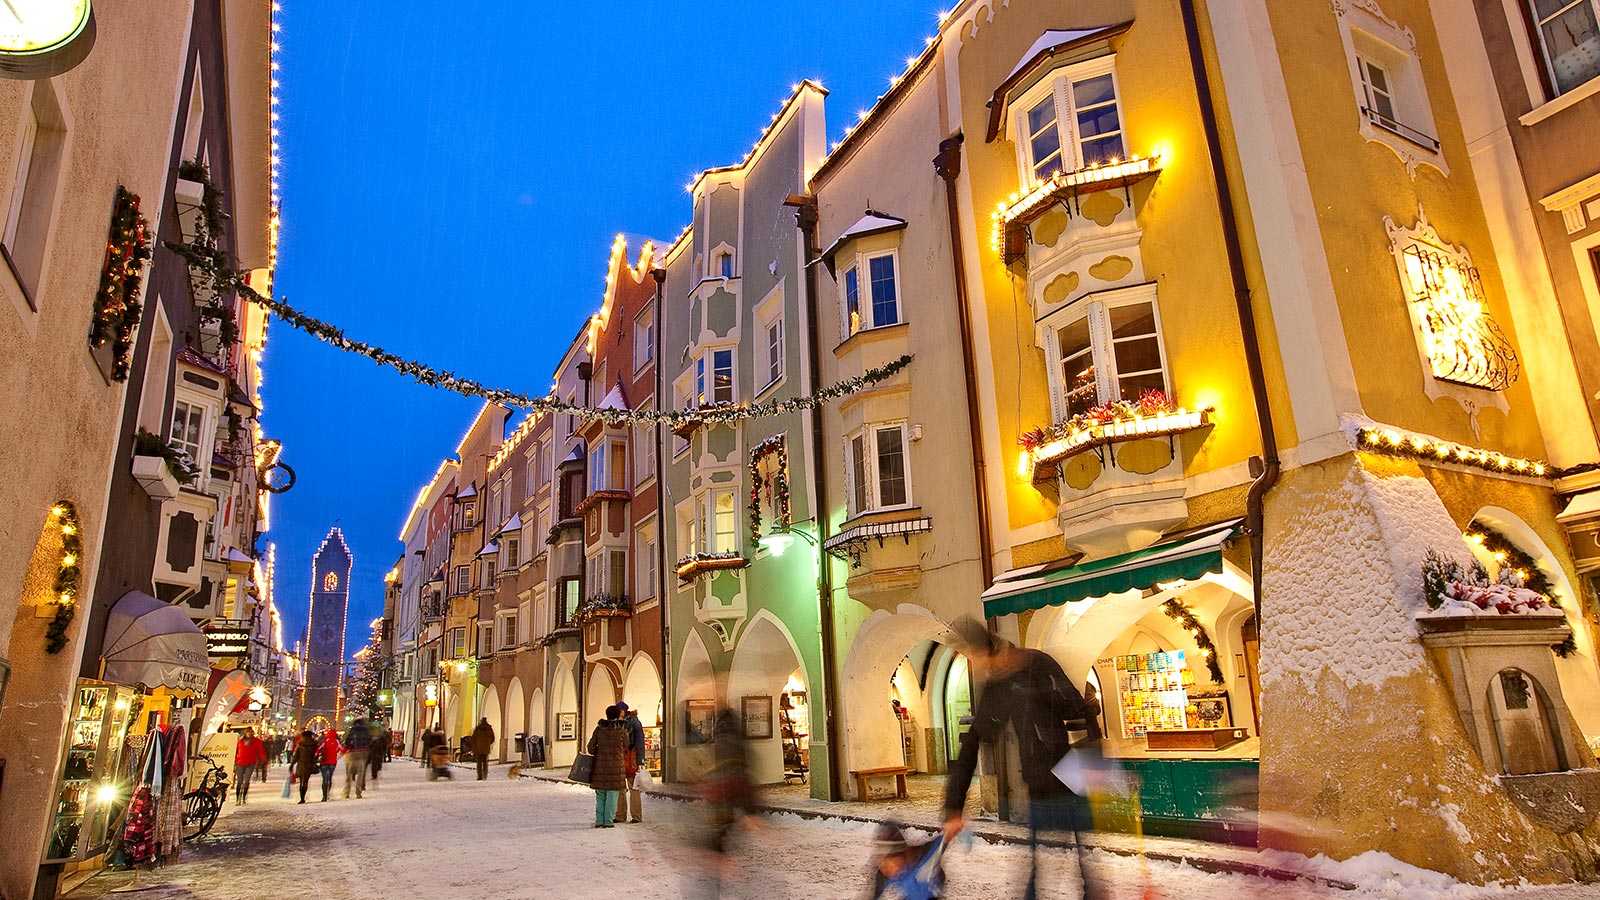 A street in the centre of Vipiteno during the winter season